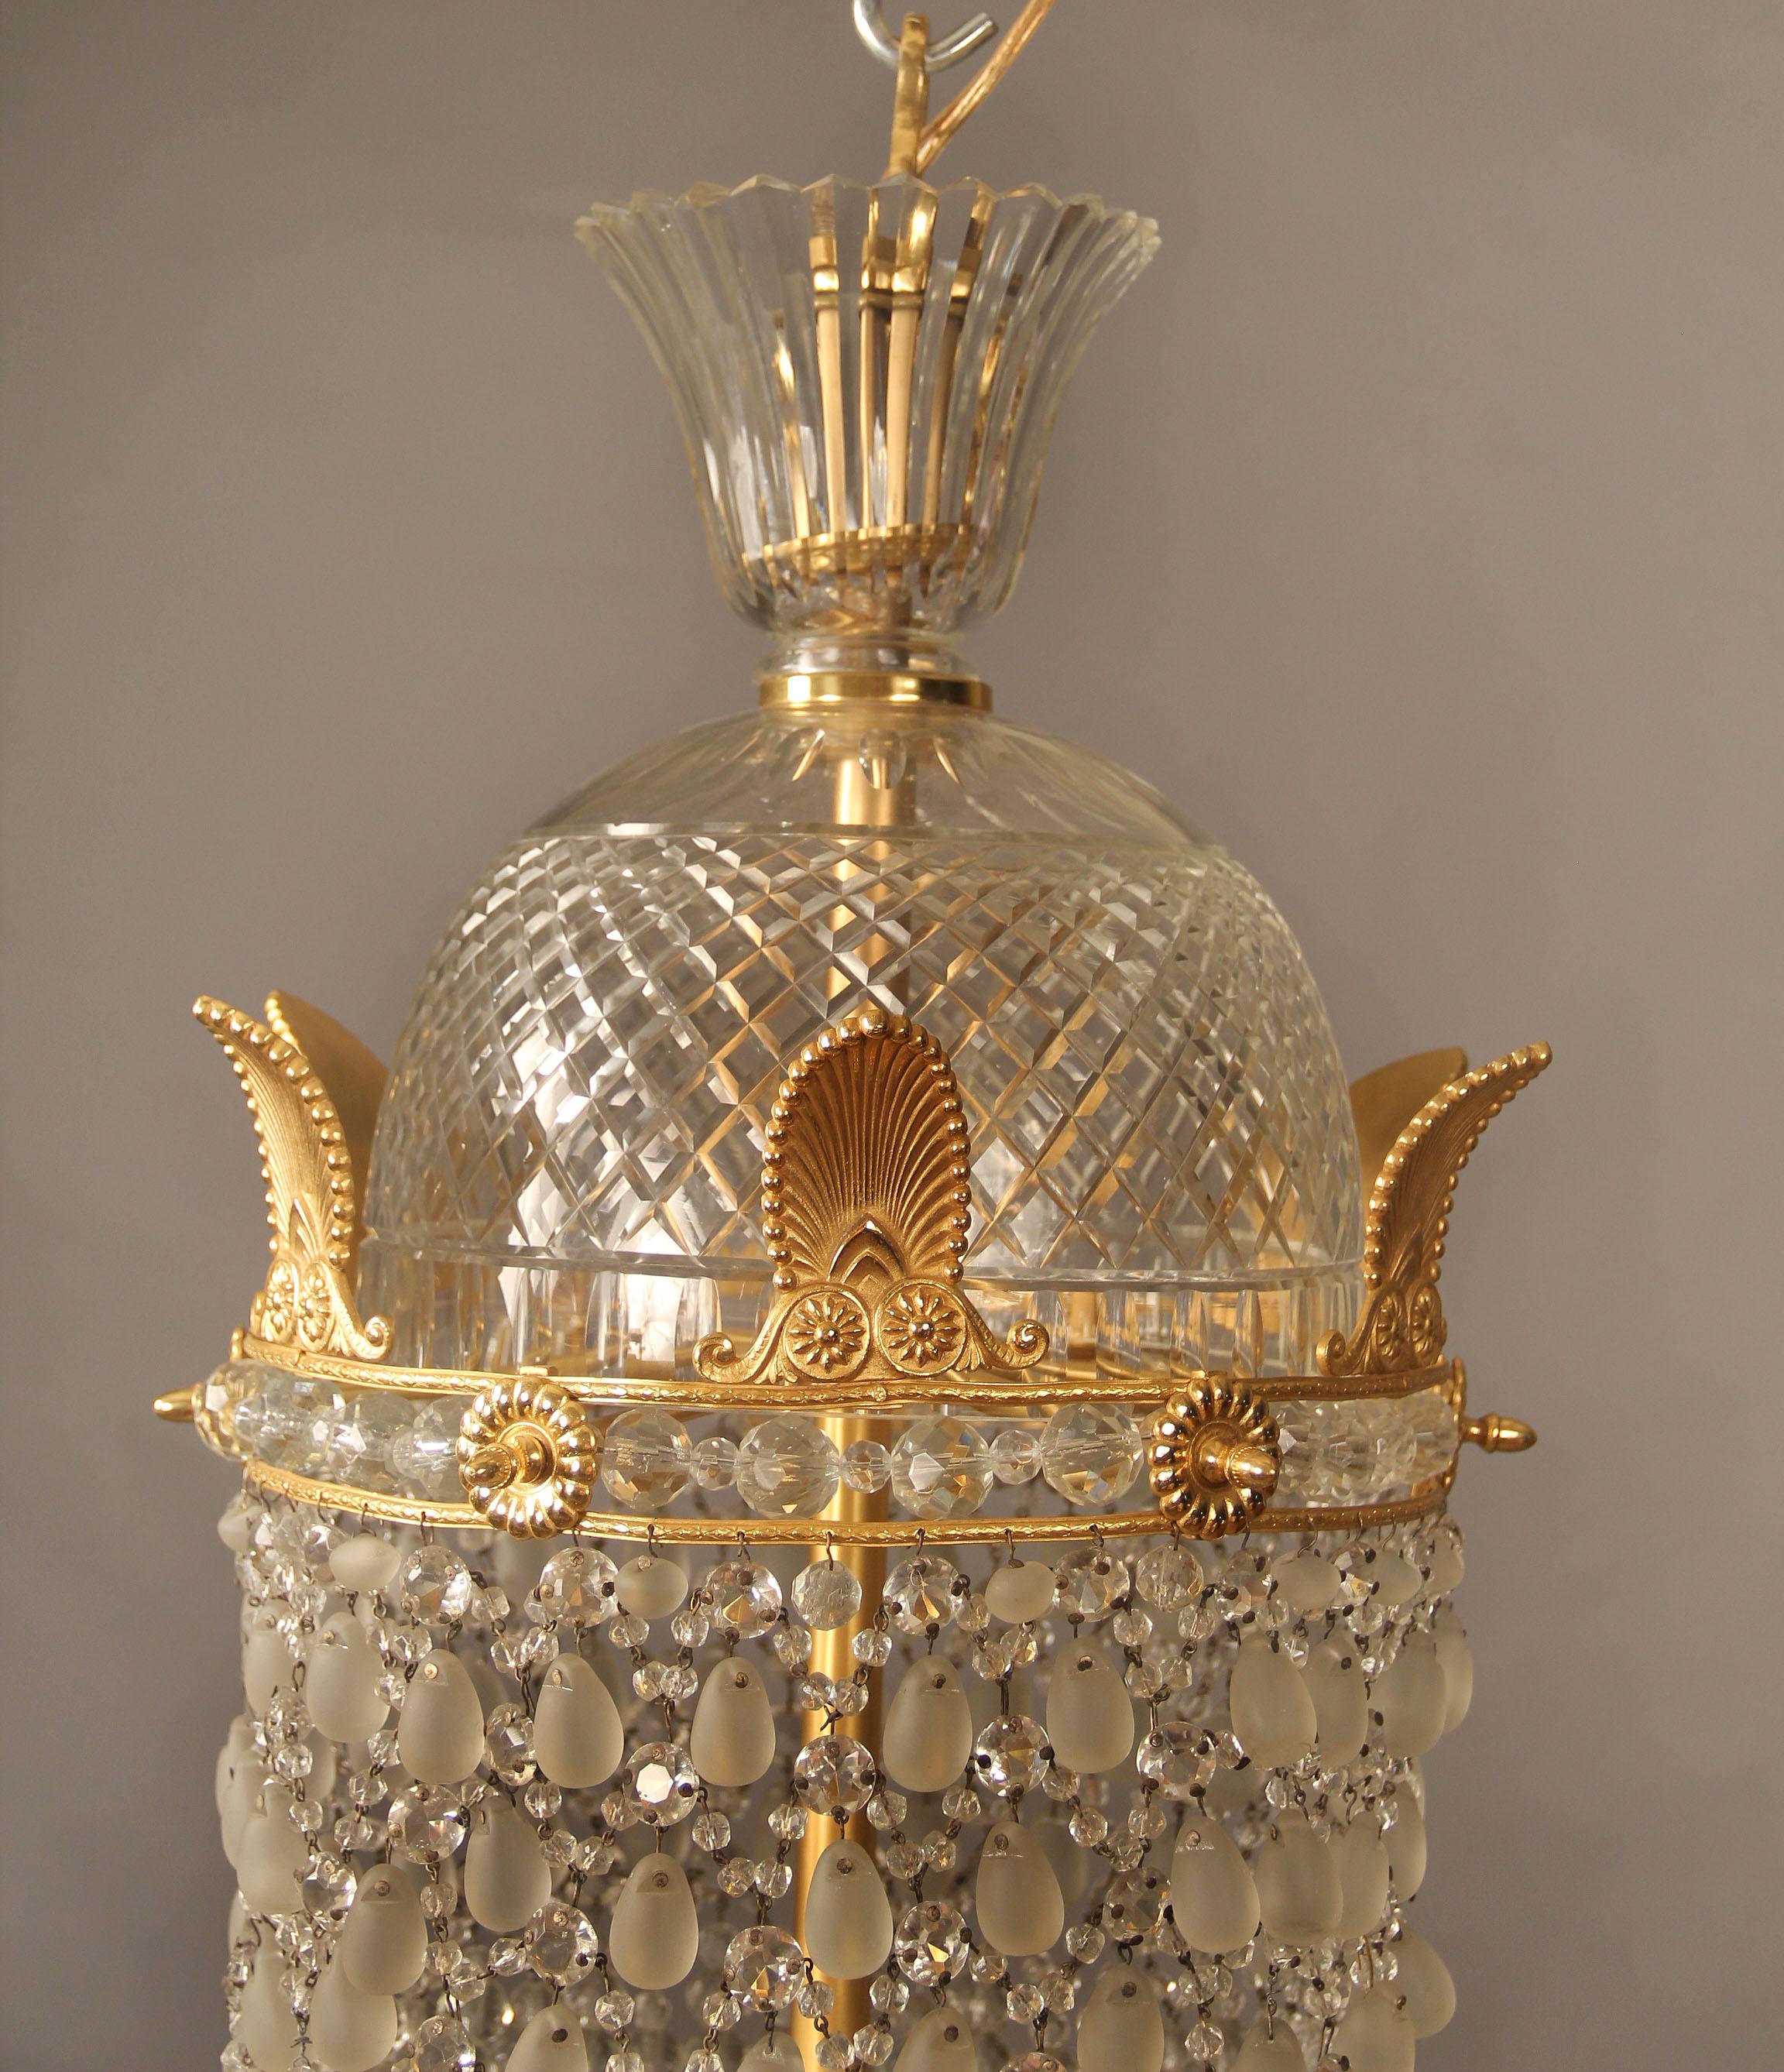 Belle Époque Late 19th/Early 20th Century Bronze and Beaded Empire Style Basket Chandelier For Sale